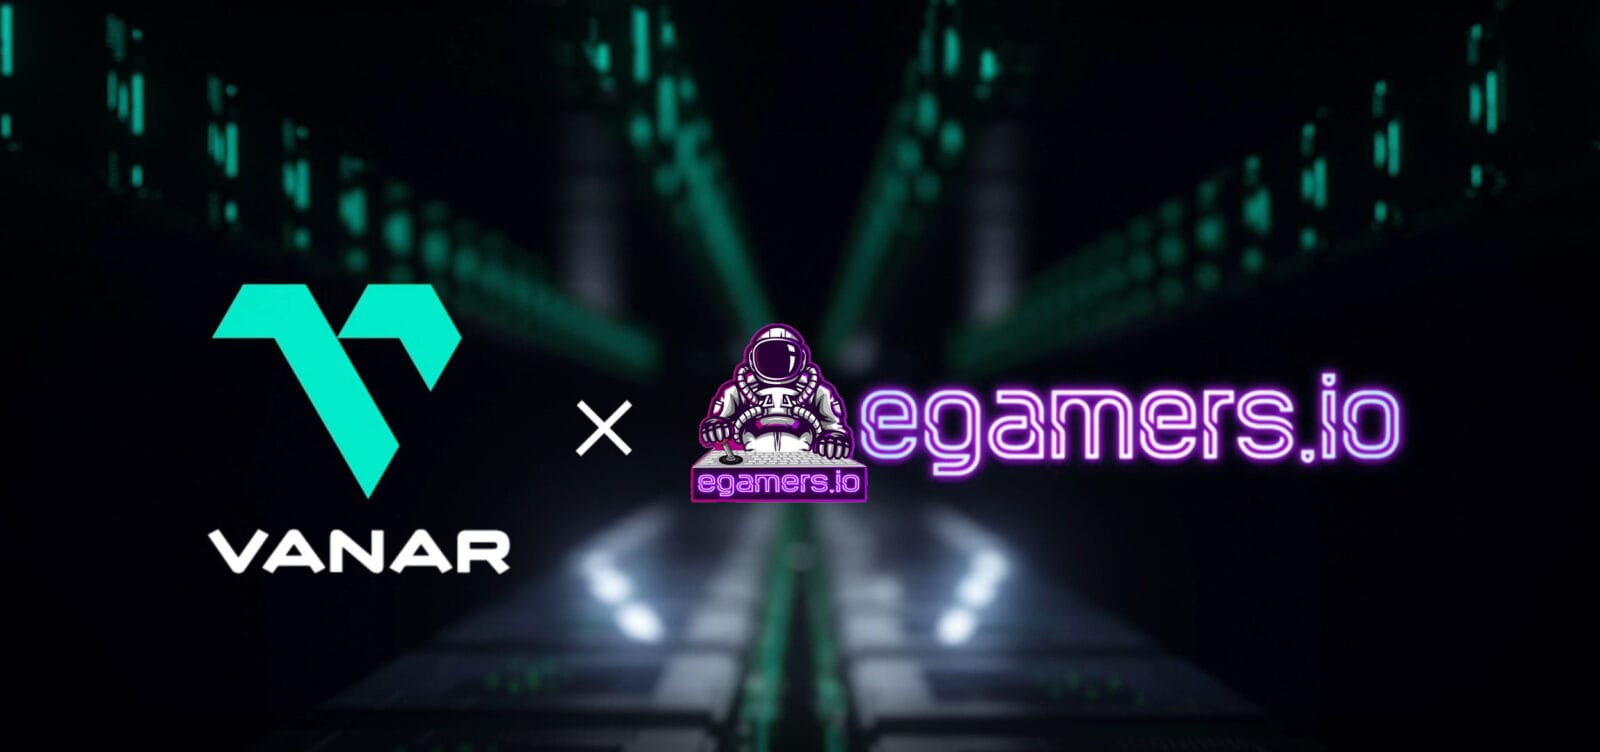 vanarxegamers We are happy to announce our latest partnership with Vanar - a groundbreaking Web3 platform designed to entertain consumers. This collaboration marks a significant milestone in our journey towards contributing to the gaming and blockchain industry.